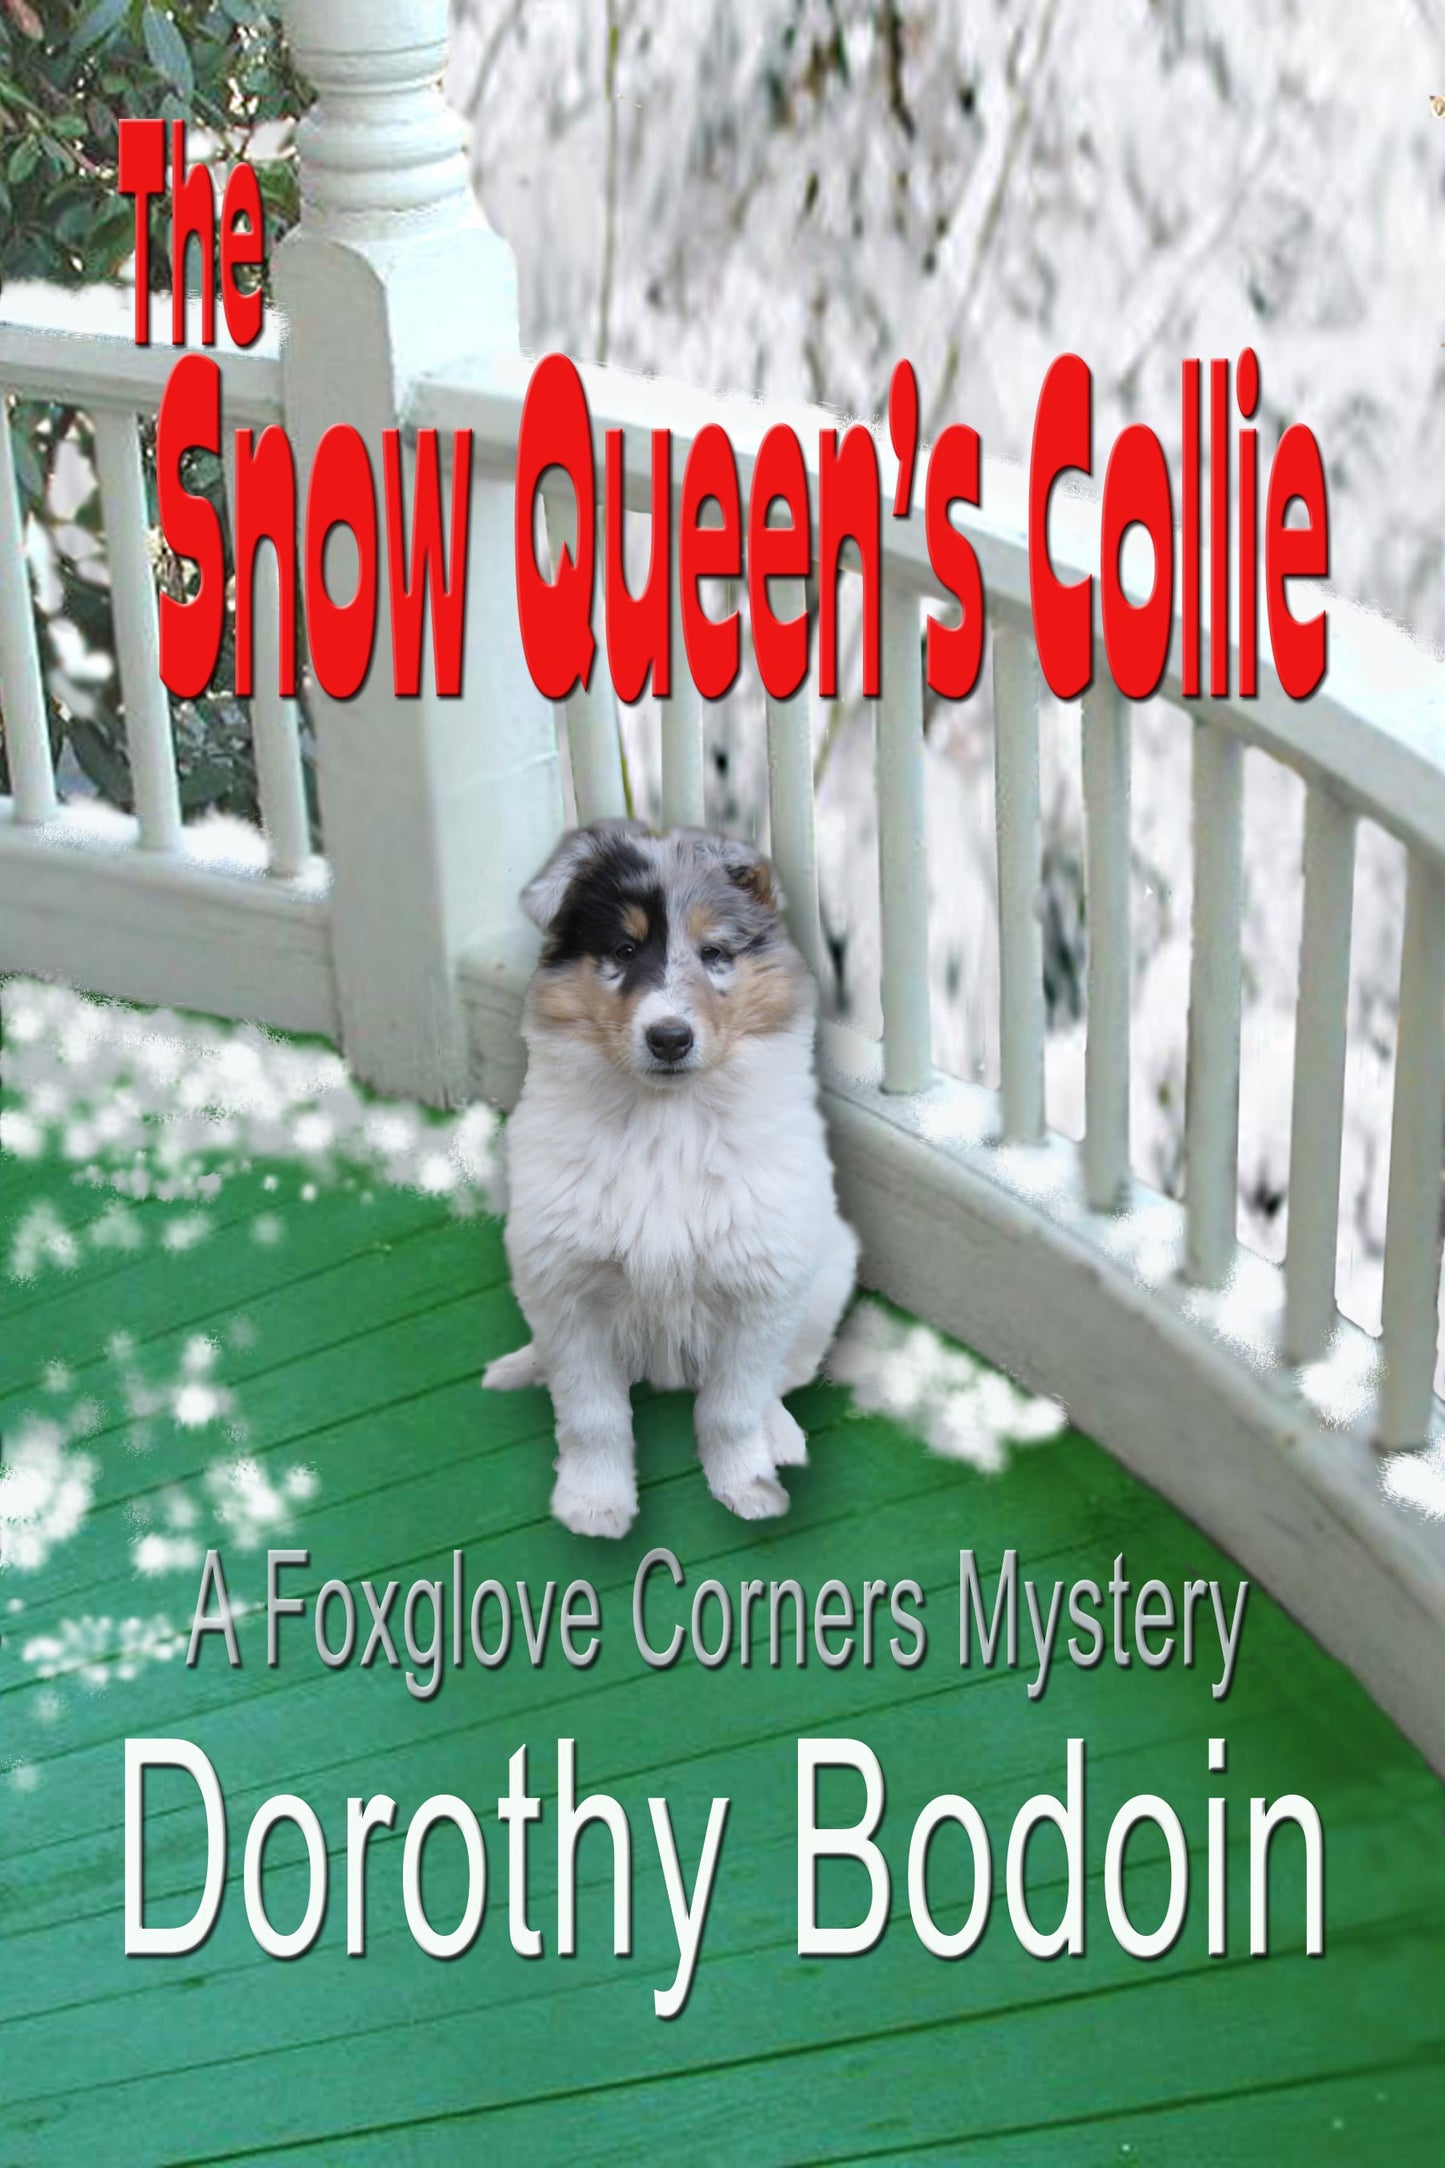 The Snow Queen's Collie (The Foxglove Corners Series Book 15)